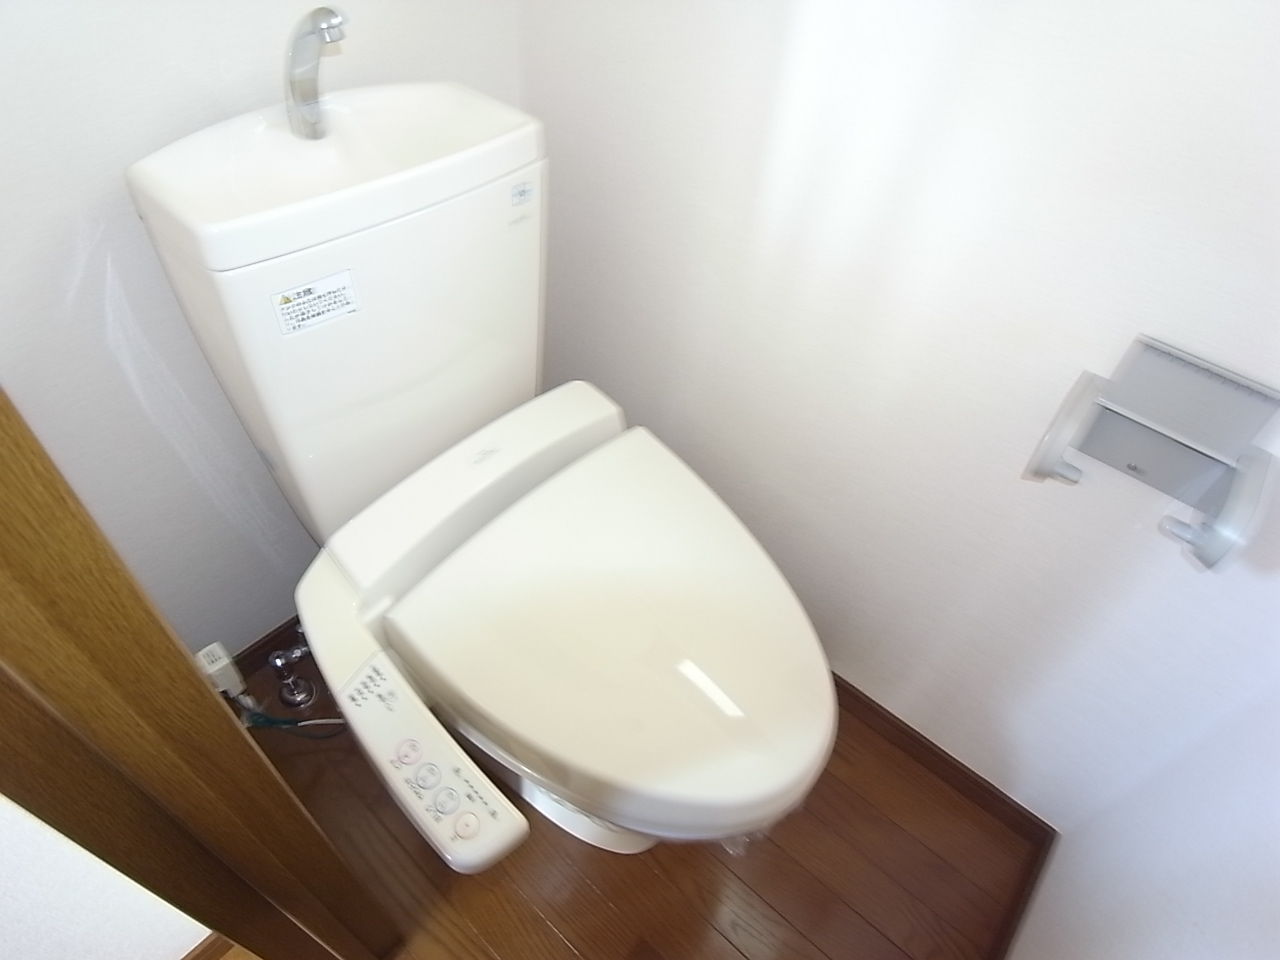 Toilet. It is a warm water washing toilet seat there is a feeling of cleanliness ^^